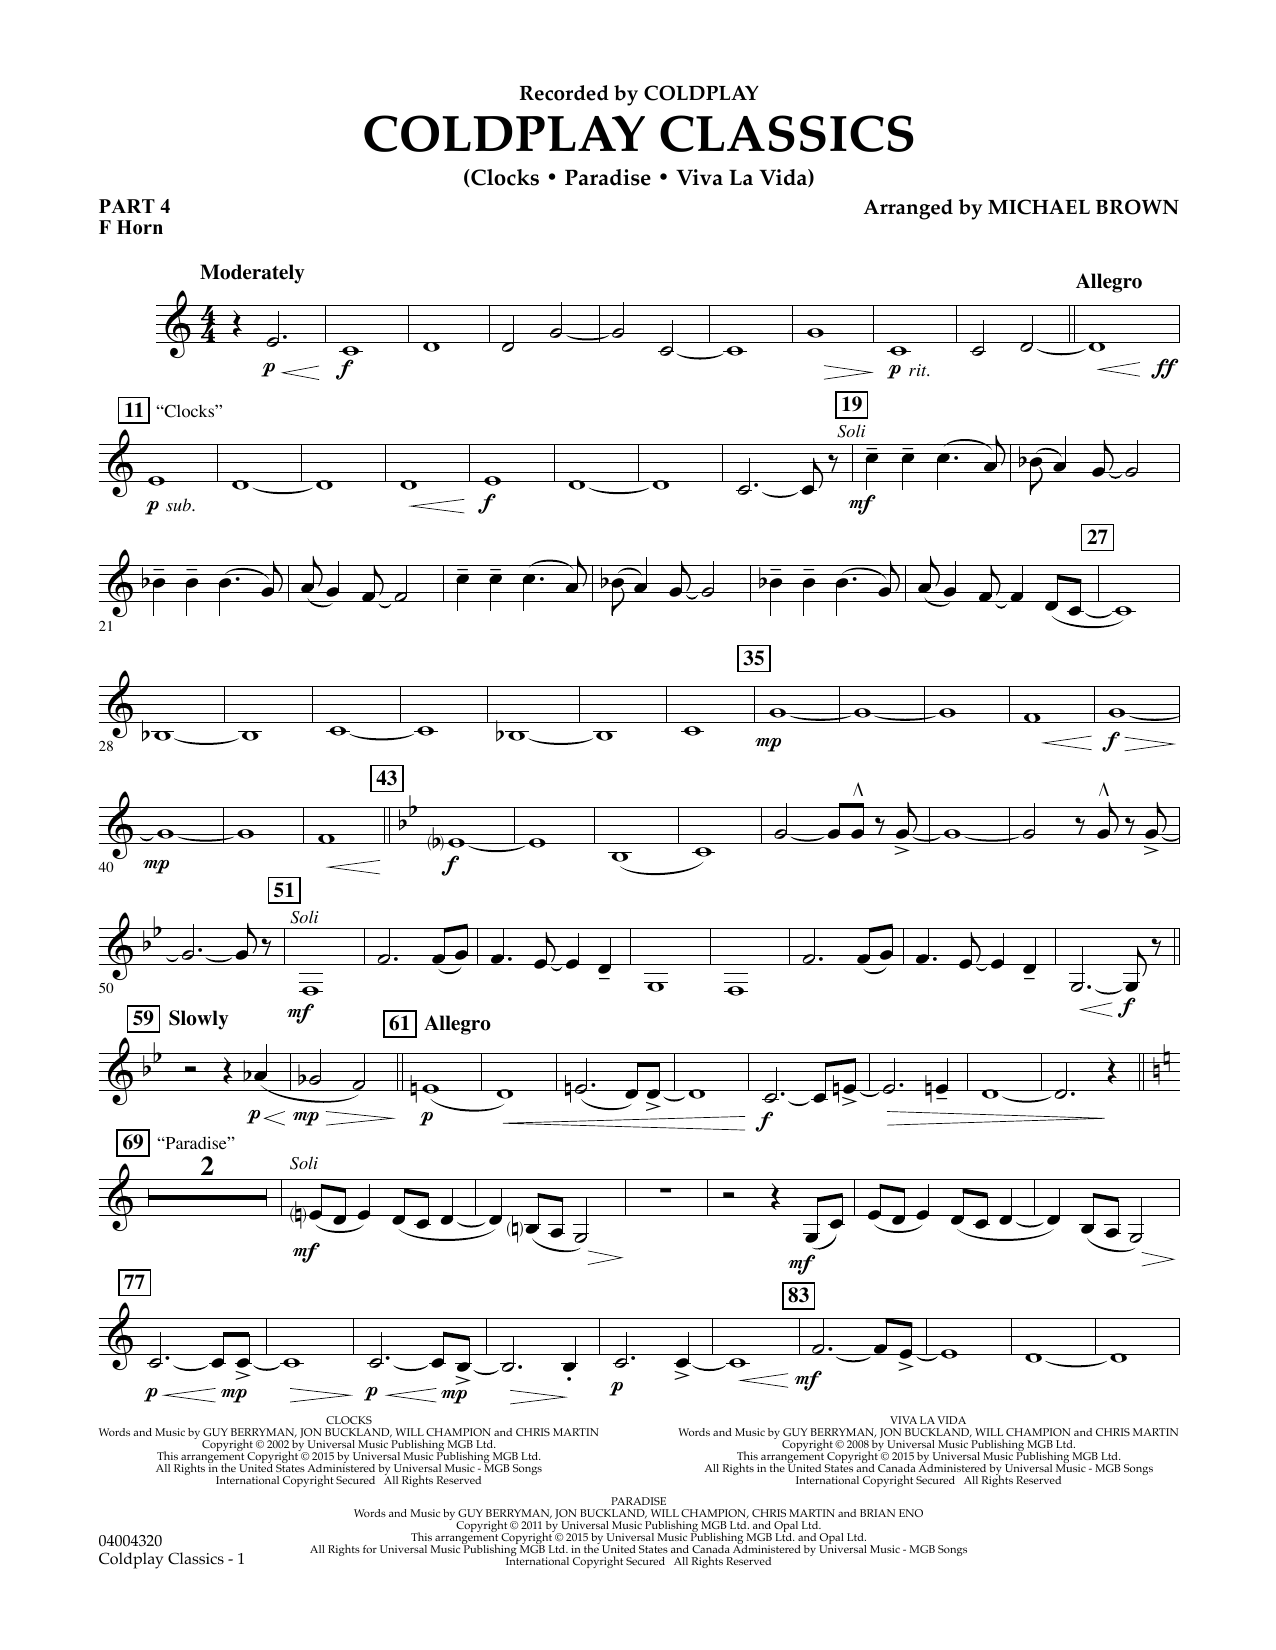 Michael Brown Coldplay Classics - Pt.4 - F Horn sheet music notes and chords. Download Printable PDF.